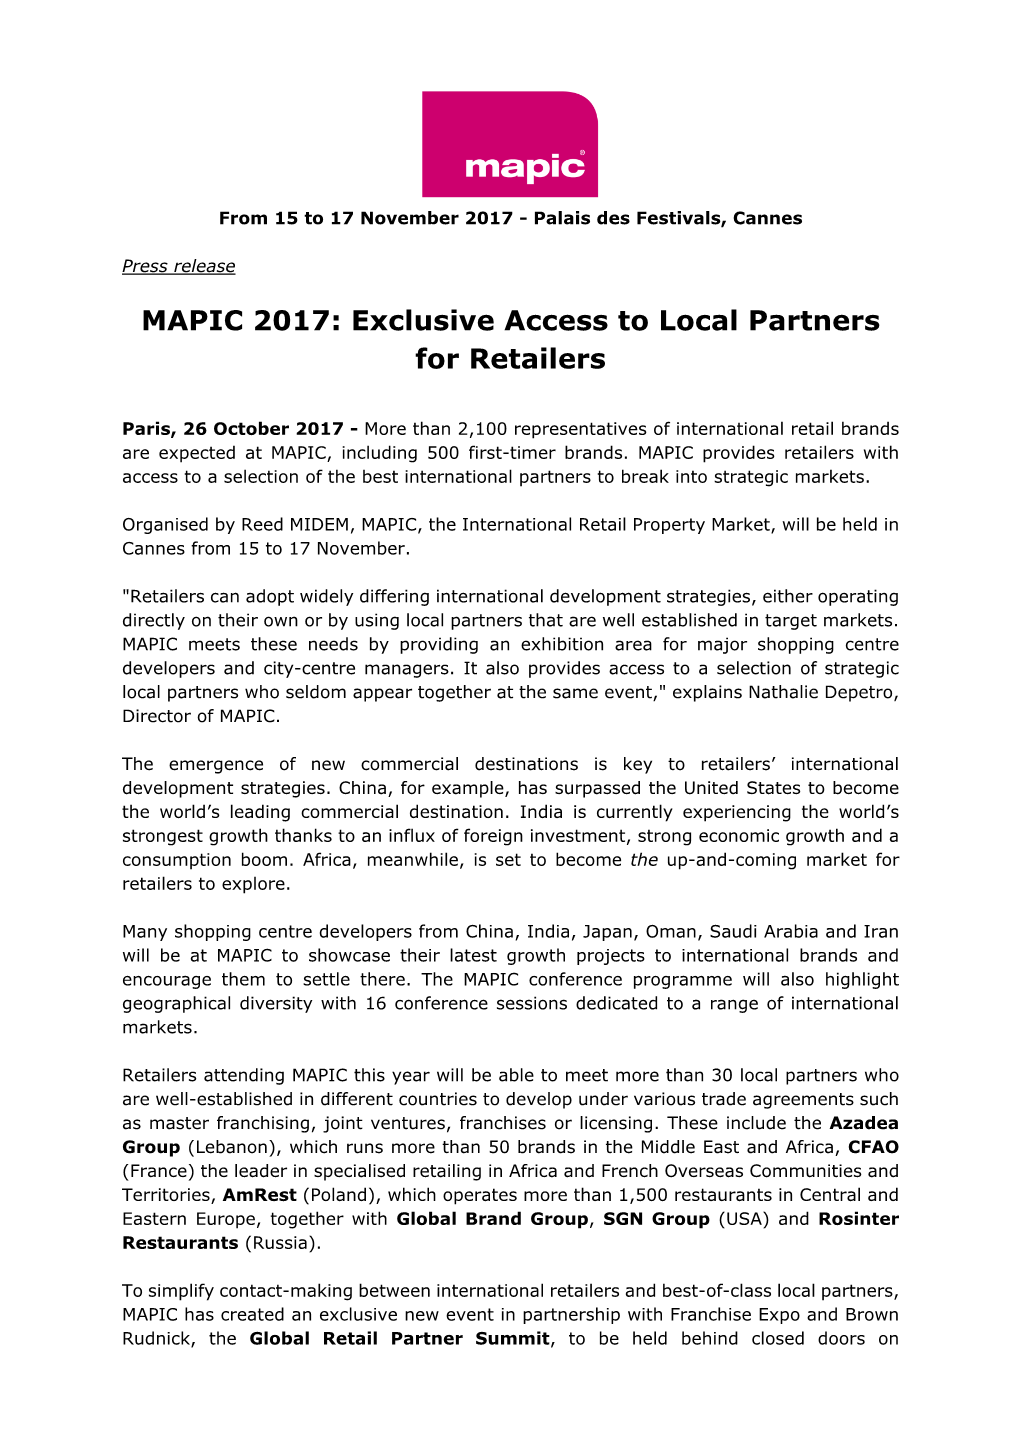 MAPIC 2017: Exclusive Access to Local Partners for Retailers